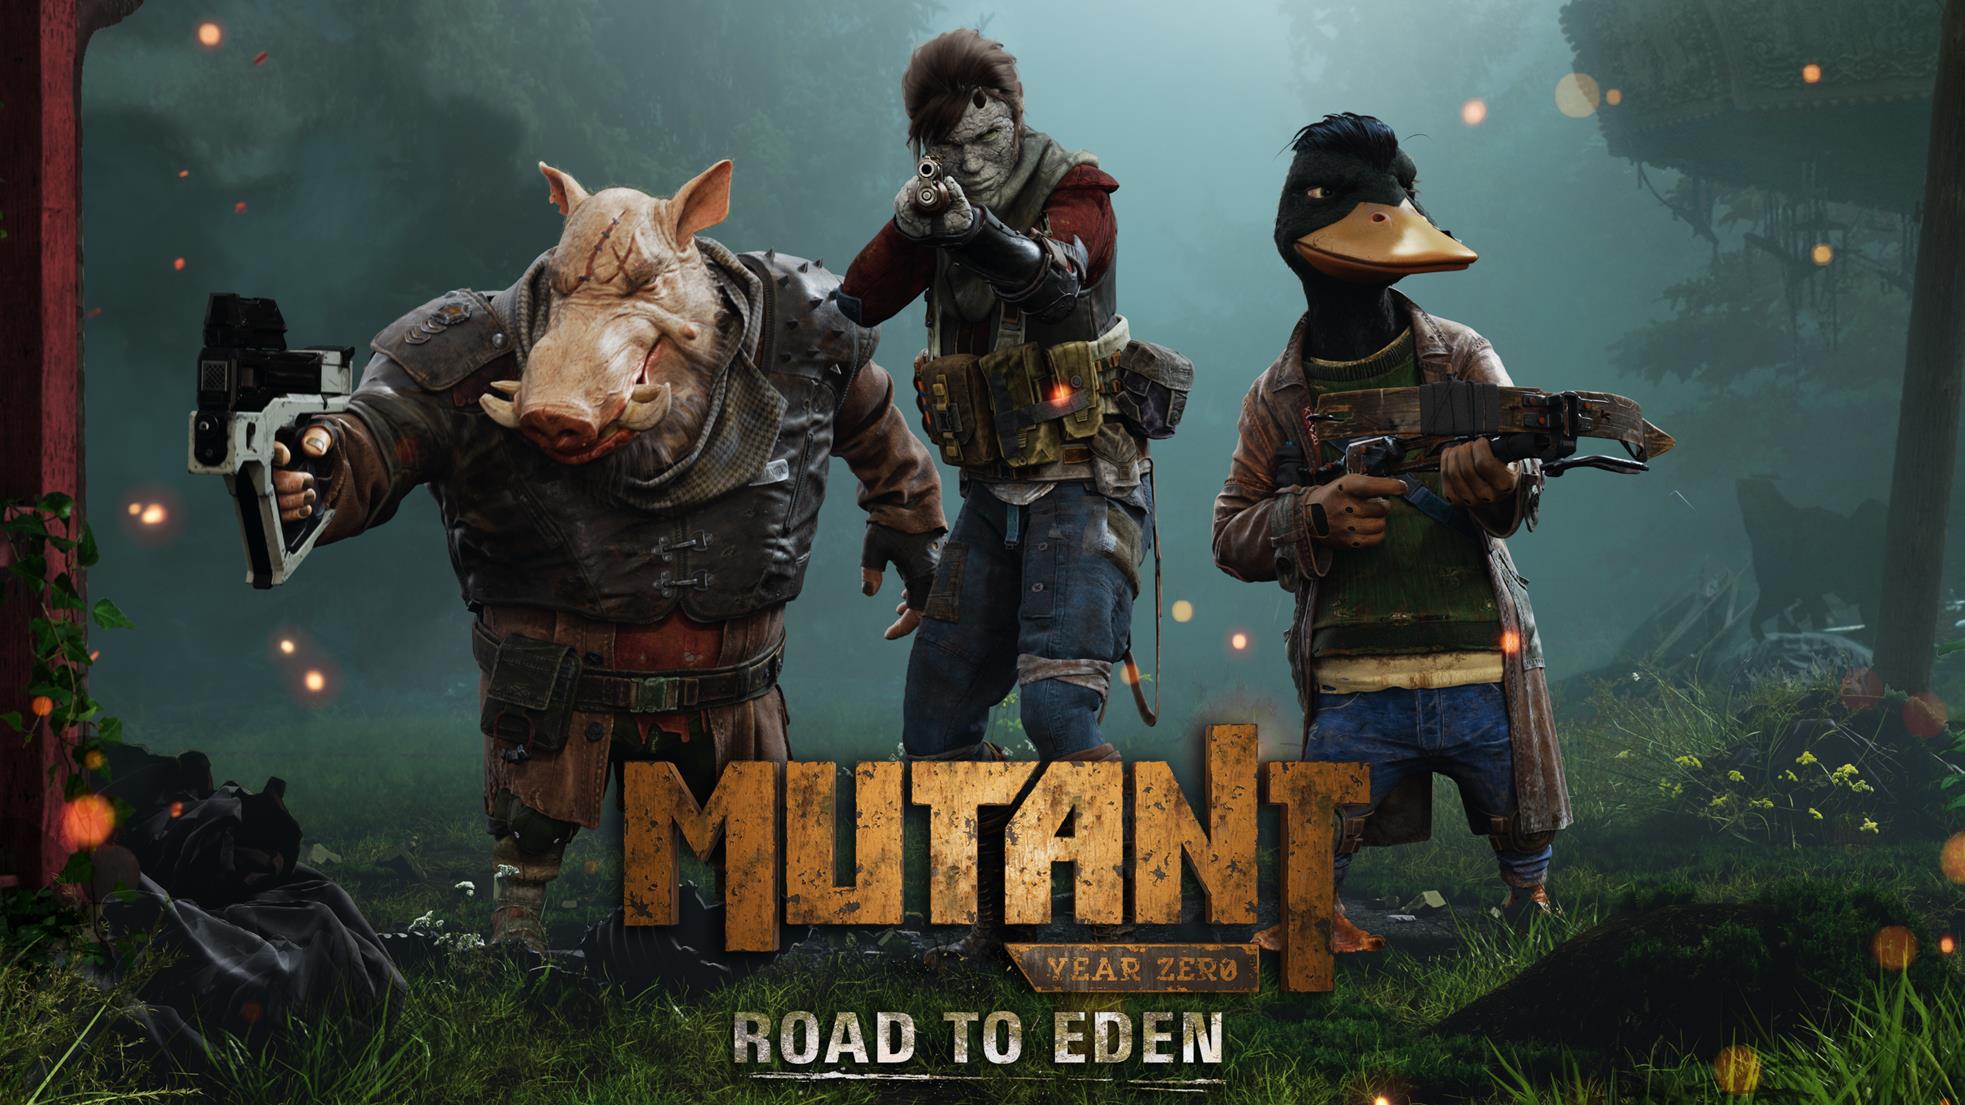 Image for Former Hitman and Payday devs announce Mutant Year Zero: Road to Eden, a game where you control a mutated duck and boar